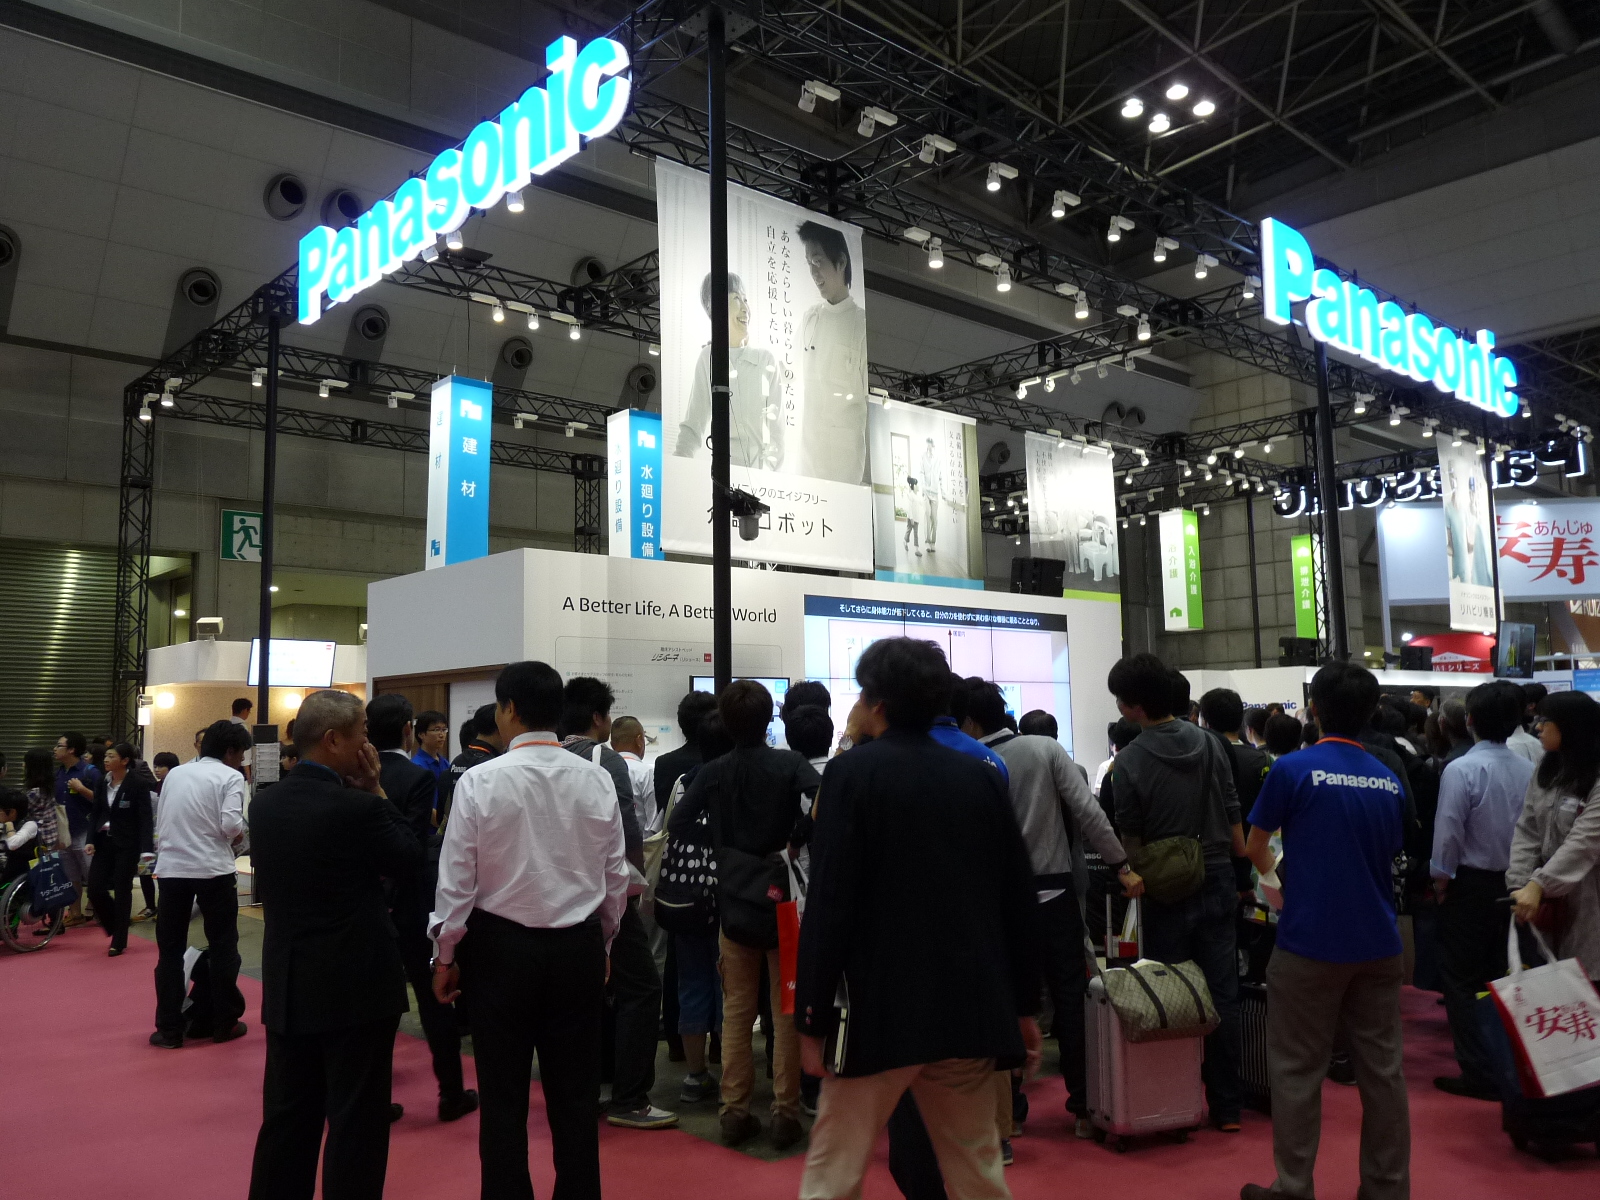 The Panasonic booth is drawing an impressive crowd at H.C.R. 2014.